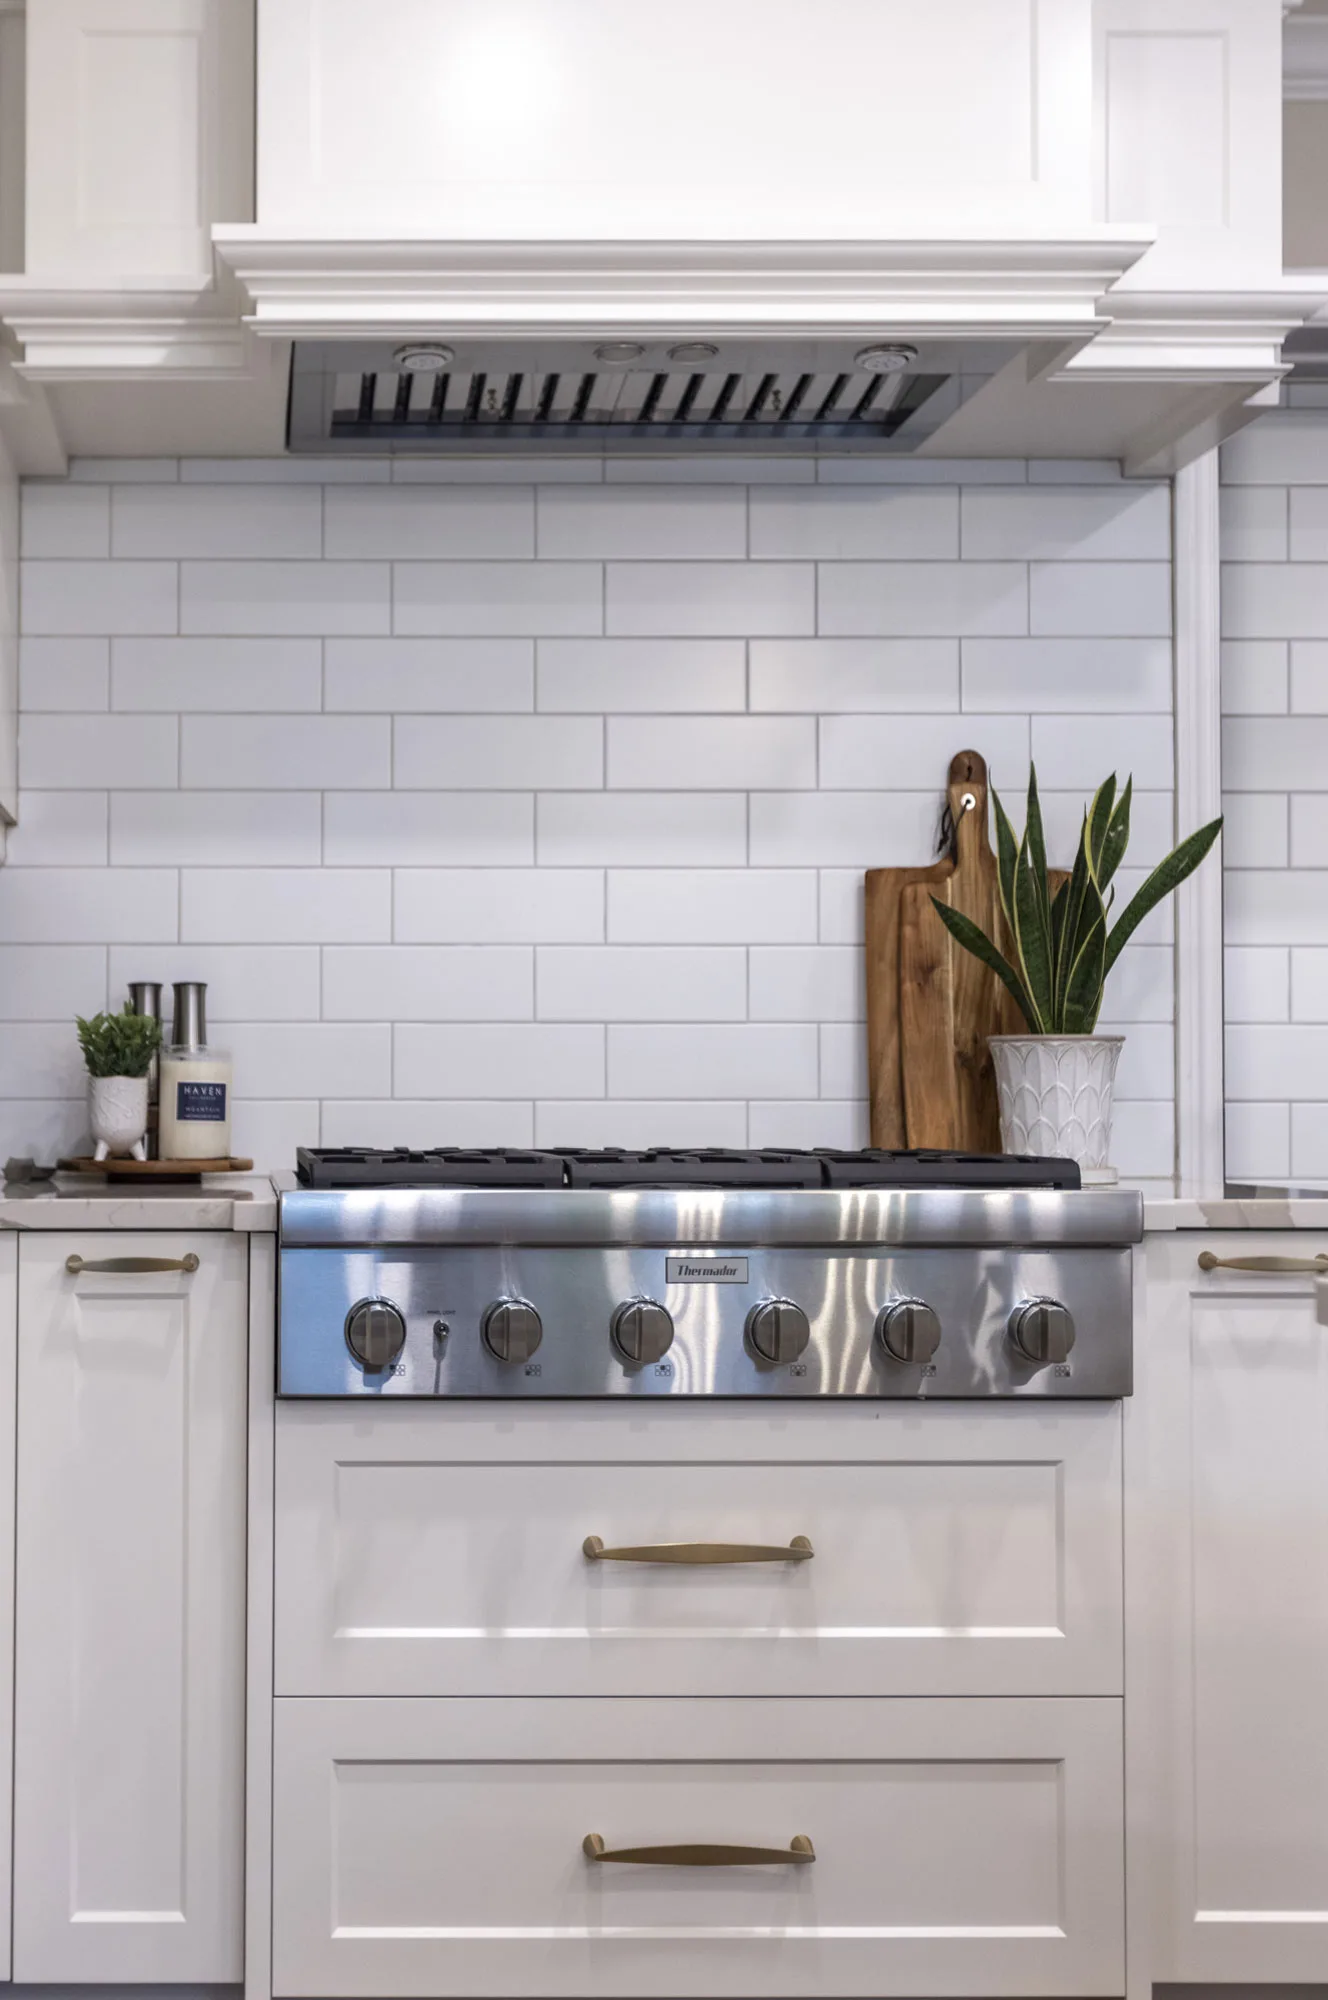 A close up of a modern white kitchen with large subway tile backsplash and stainless steel oven top